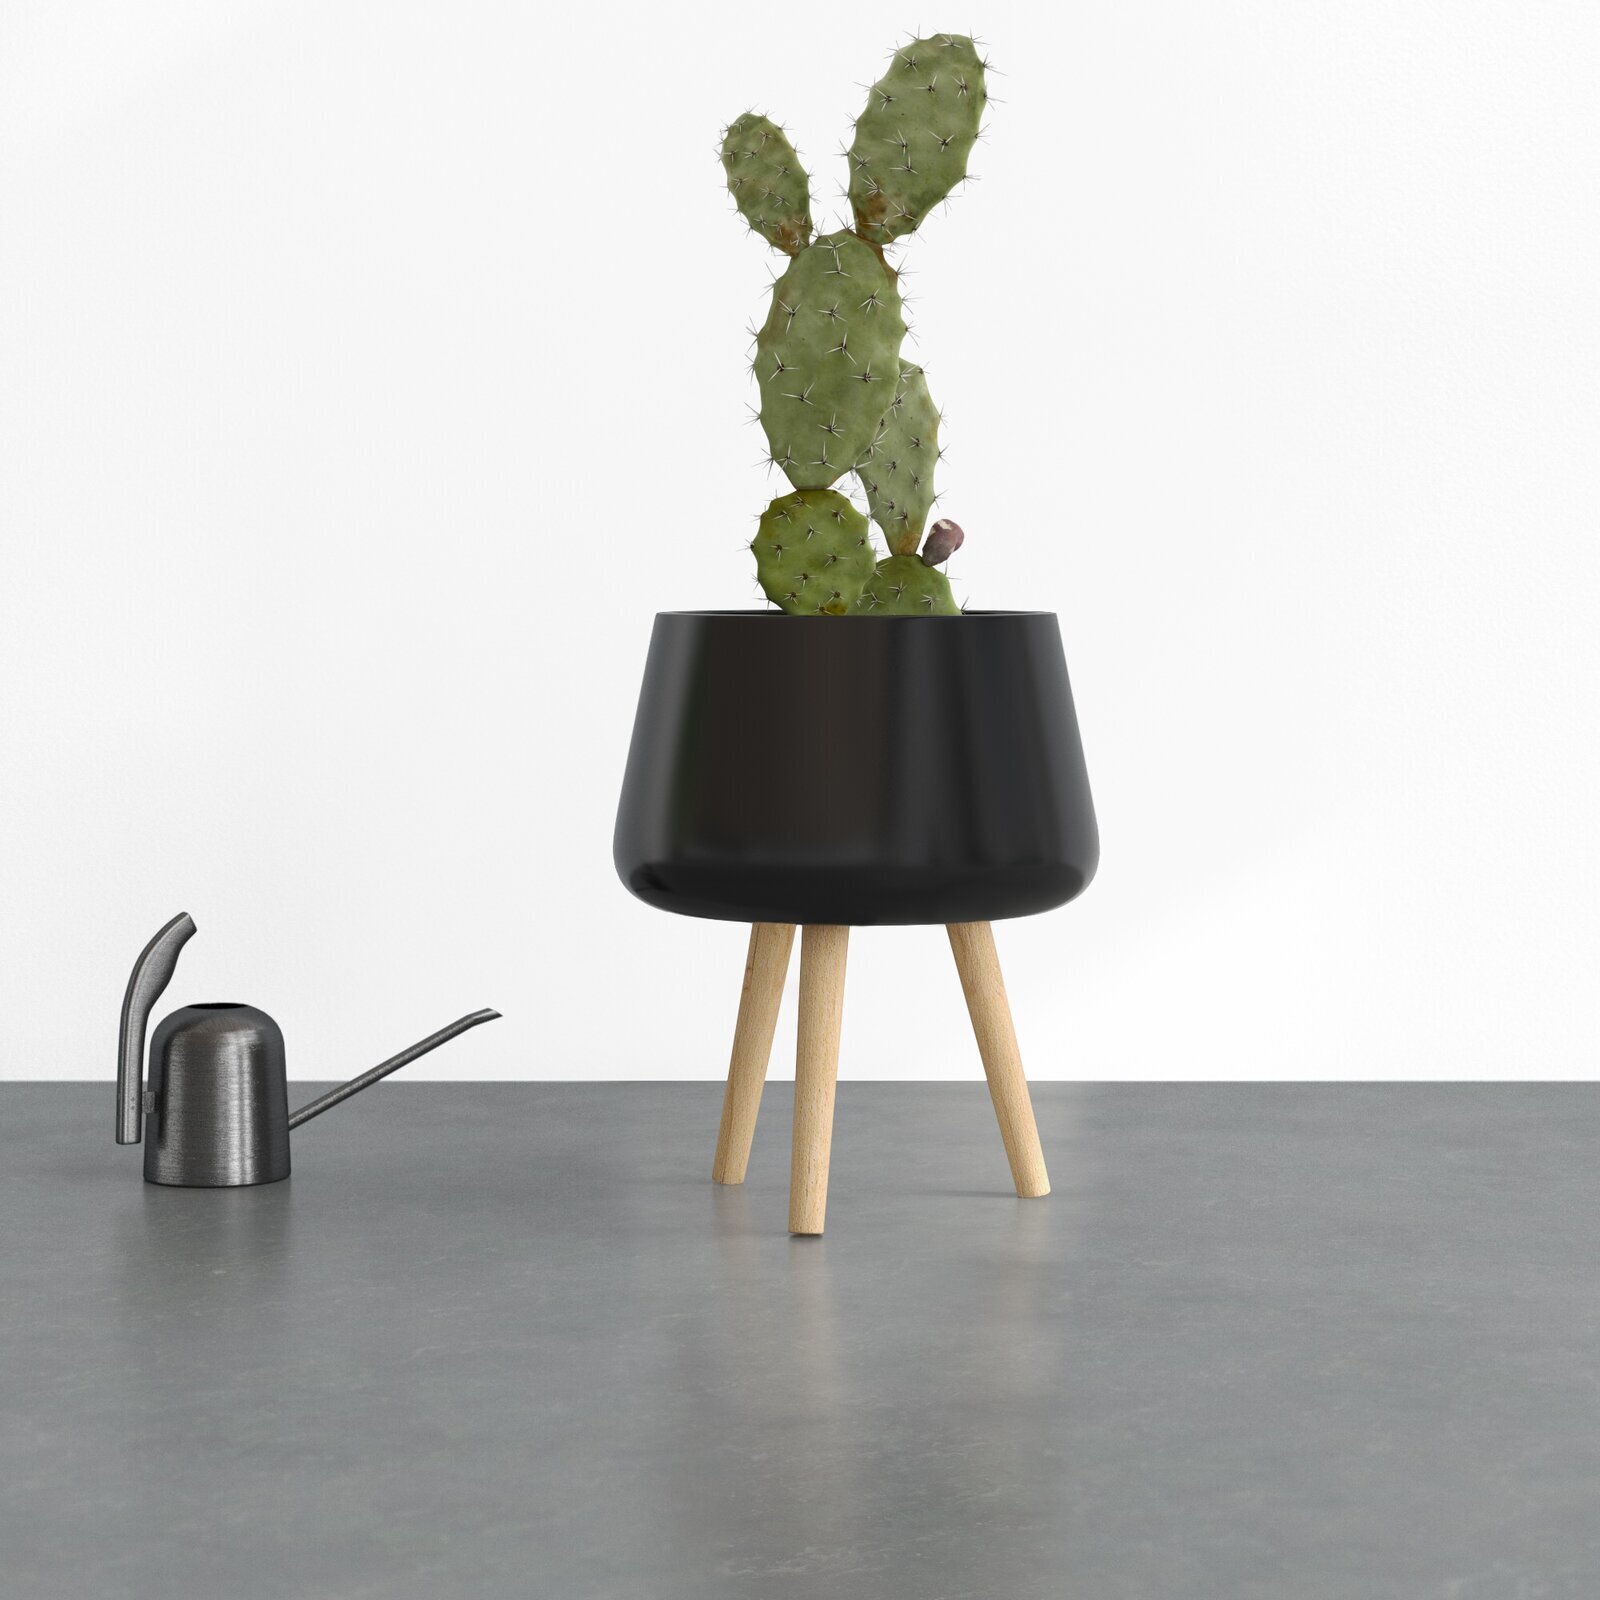 Black Ceramic Outdoor Ceramic Planters on Wooden Tripod Stands